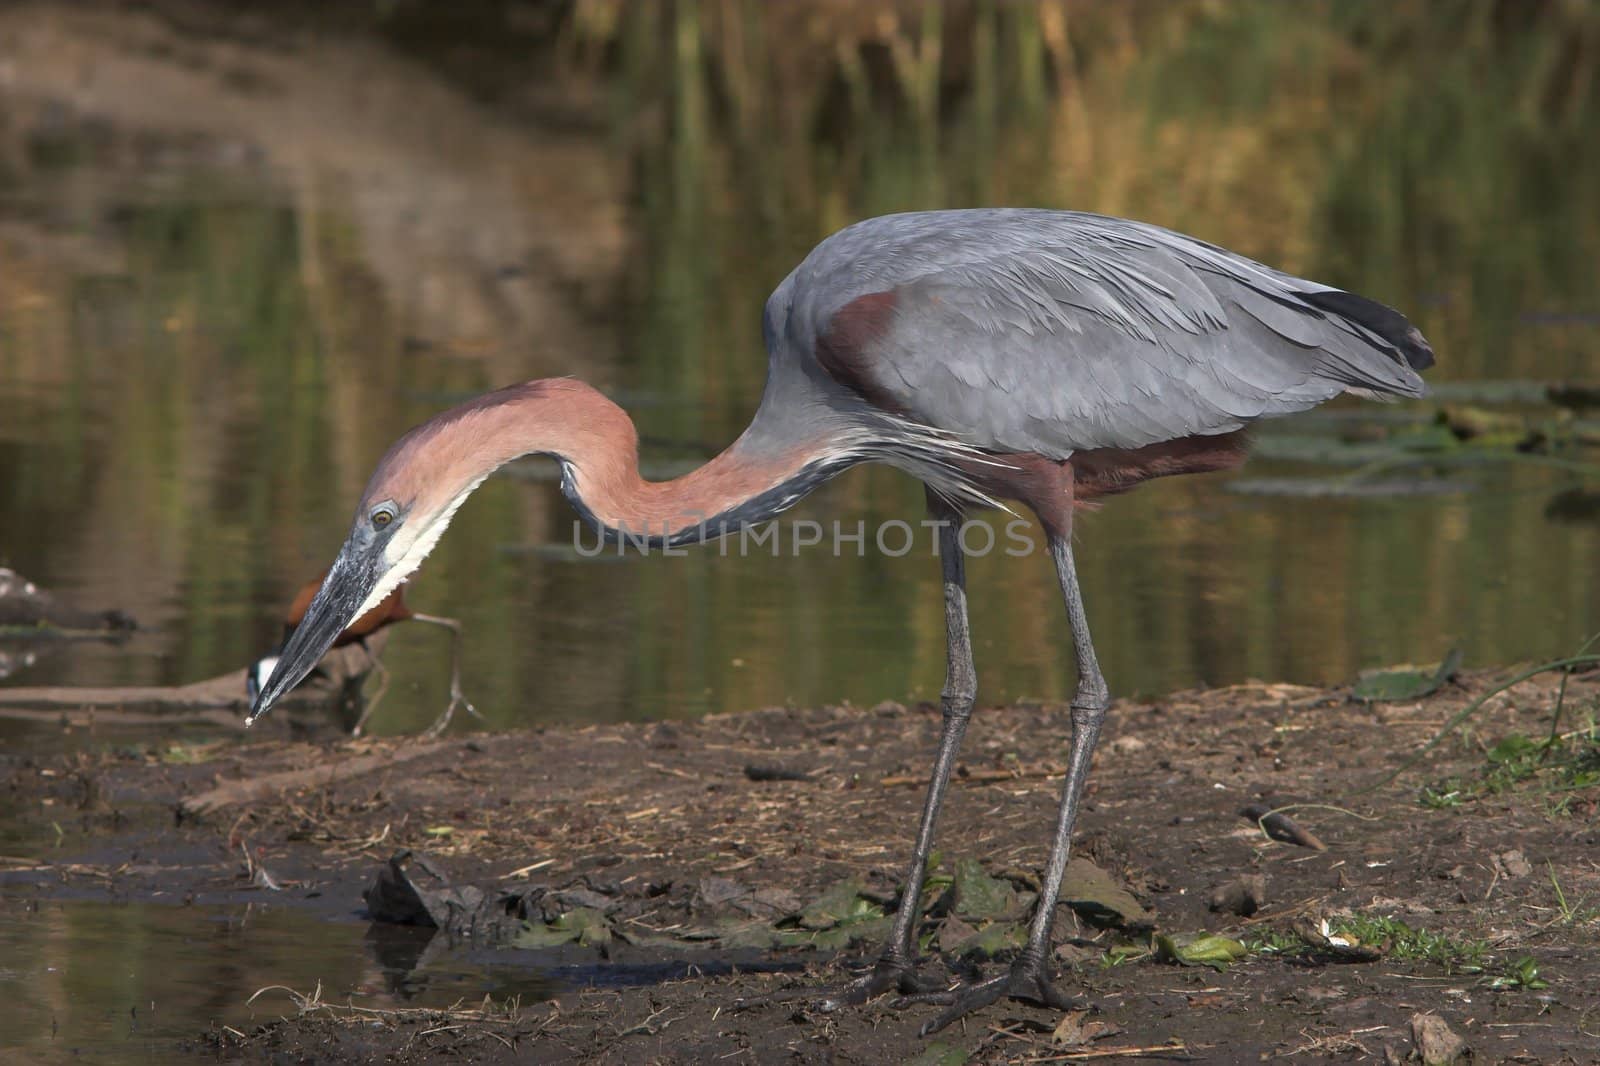 Goliath Heron scanning the water for fish